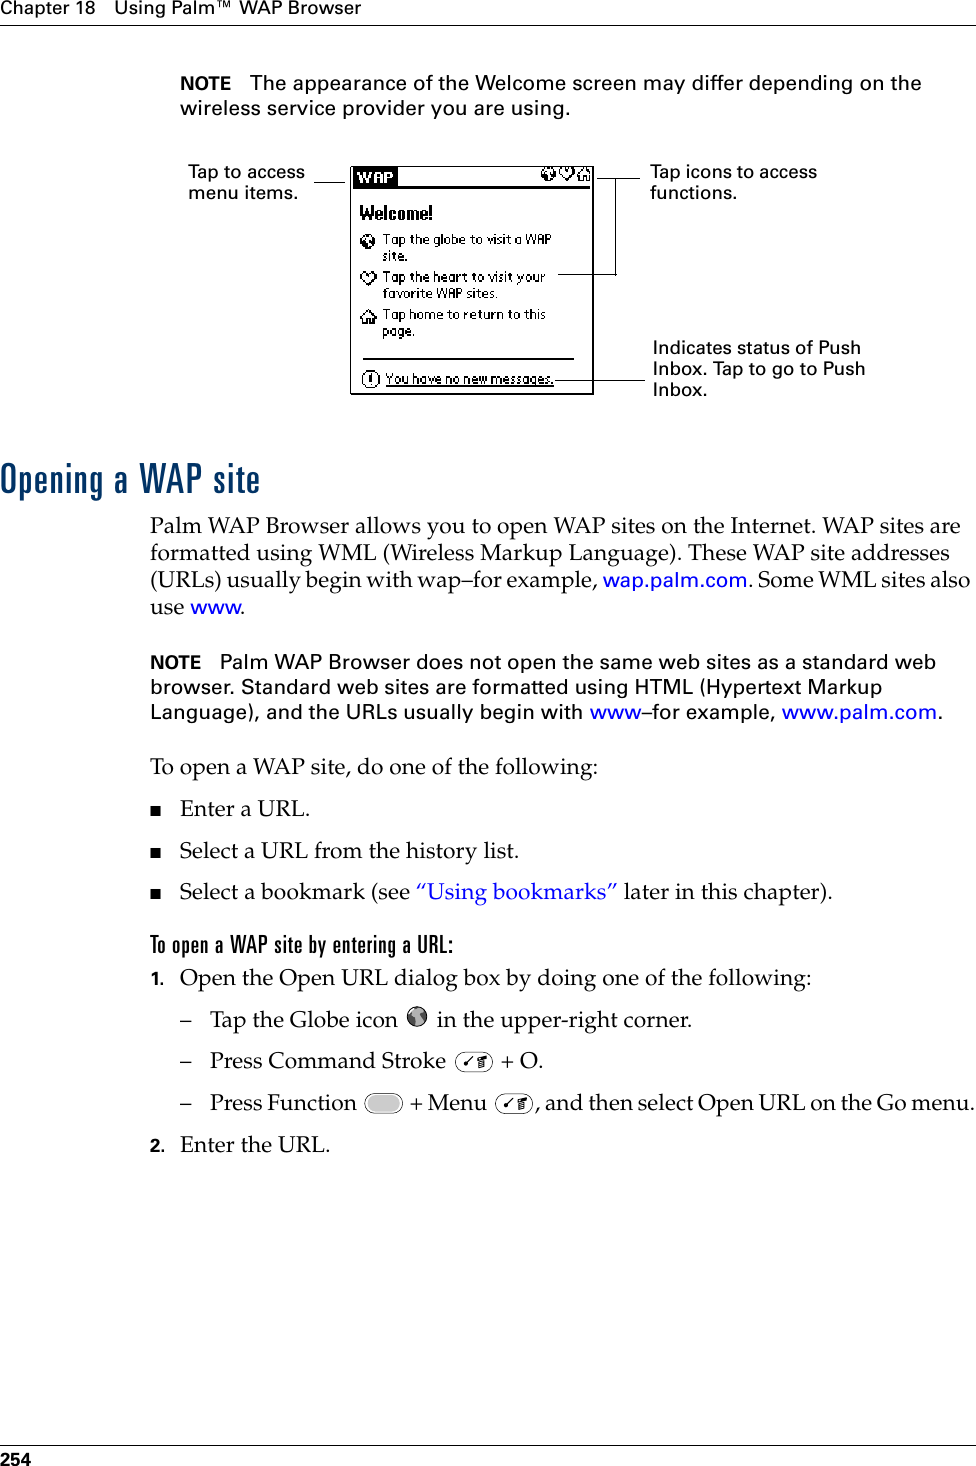 Chapter 18 Using Palm™ WAP Browser254NOTE The appearance of the Welcome screen may differ depending on the wireless service provider you are using.Opening a WAP sitePalm WAP Browser allows you to open WAP sites on the Internet. WAP sites are formatted using WML (Wireless Markup Language). These WAP site addresses (URLs) usually begin with wap–for example, wap.palm.com. Some WML sites also use www.NOTE Palm WAP Browser does not open the same web sites as a standard web browser. Standard web sites are formatted using HTML (Hypertext Markup Language), and the URLs usually begin with www–for example, www.palm.com. To open a WAP site, do one of the following:■Enter a URL.■Select a URL from the history list.■Select a bookmark (see “Using bookmarks” later in this chapter).To open a WAP site by entering a URL:1. Open the Open URL dialog box by doing one of the following:– Tap the Globe icon   in the upper-right corner.– Press Command Stroke   + O.– Press Function   + Menu  , and then select Open URL on the Go menu.2. Enter the URL. Indicates status of Push Inbox. Tap to go to Push Inbox.Tap to access menu items.Tap icons to access functions.Palm, Inc. Confidential